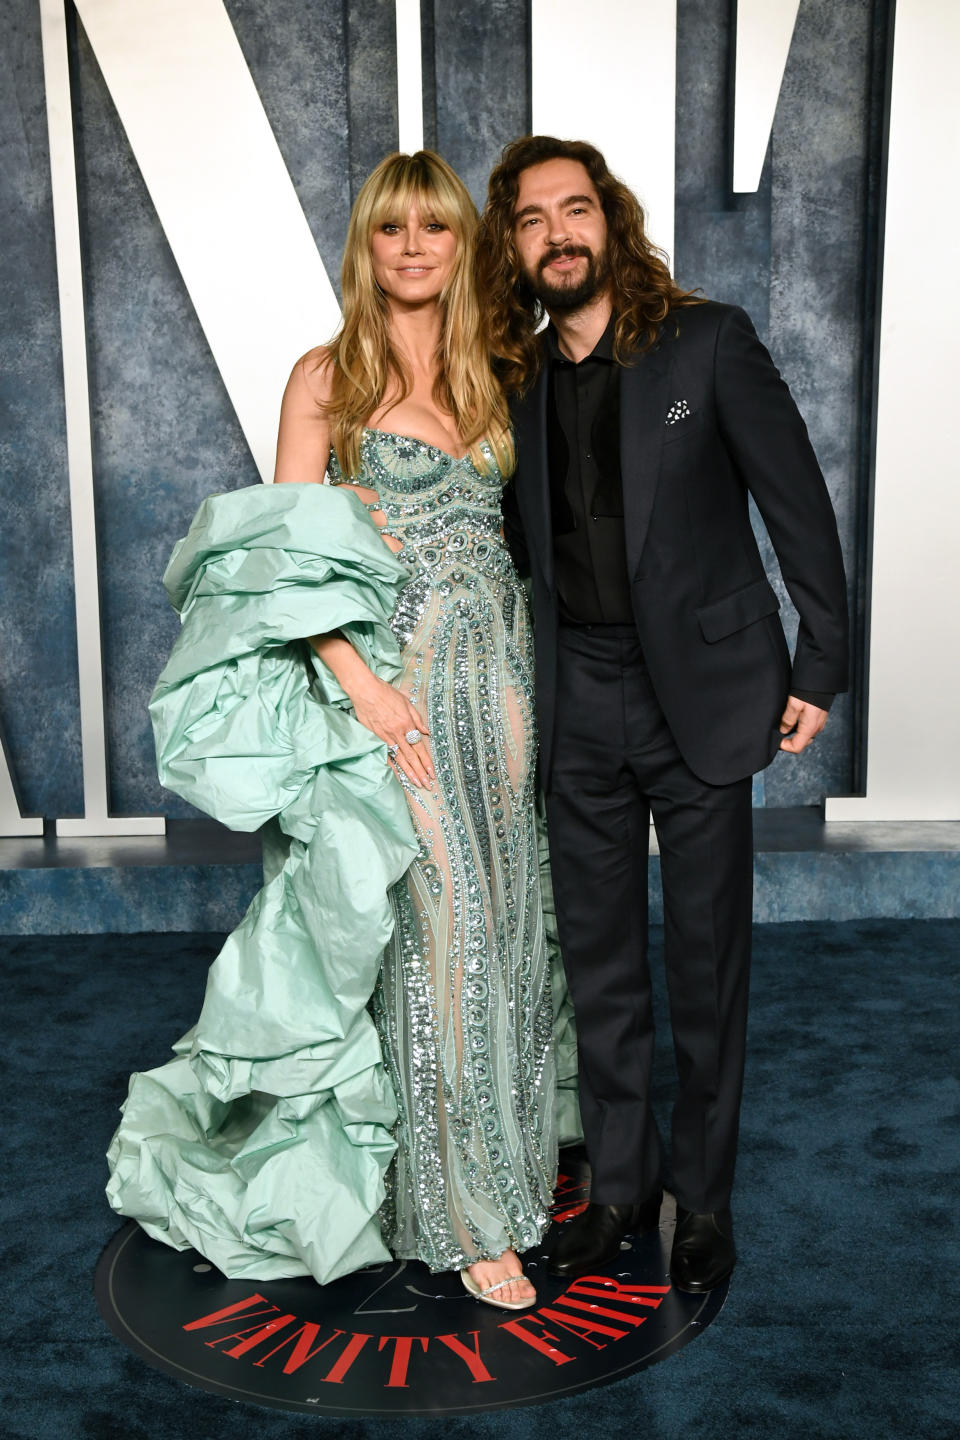 Heidi Klum and Tom Kaulitz at the 2023 Vanity Fair Oscar party on March 12, 2023 in Beverly Hills. - Credit: Getty Images for Vanity Fair